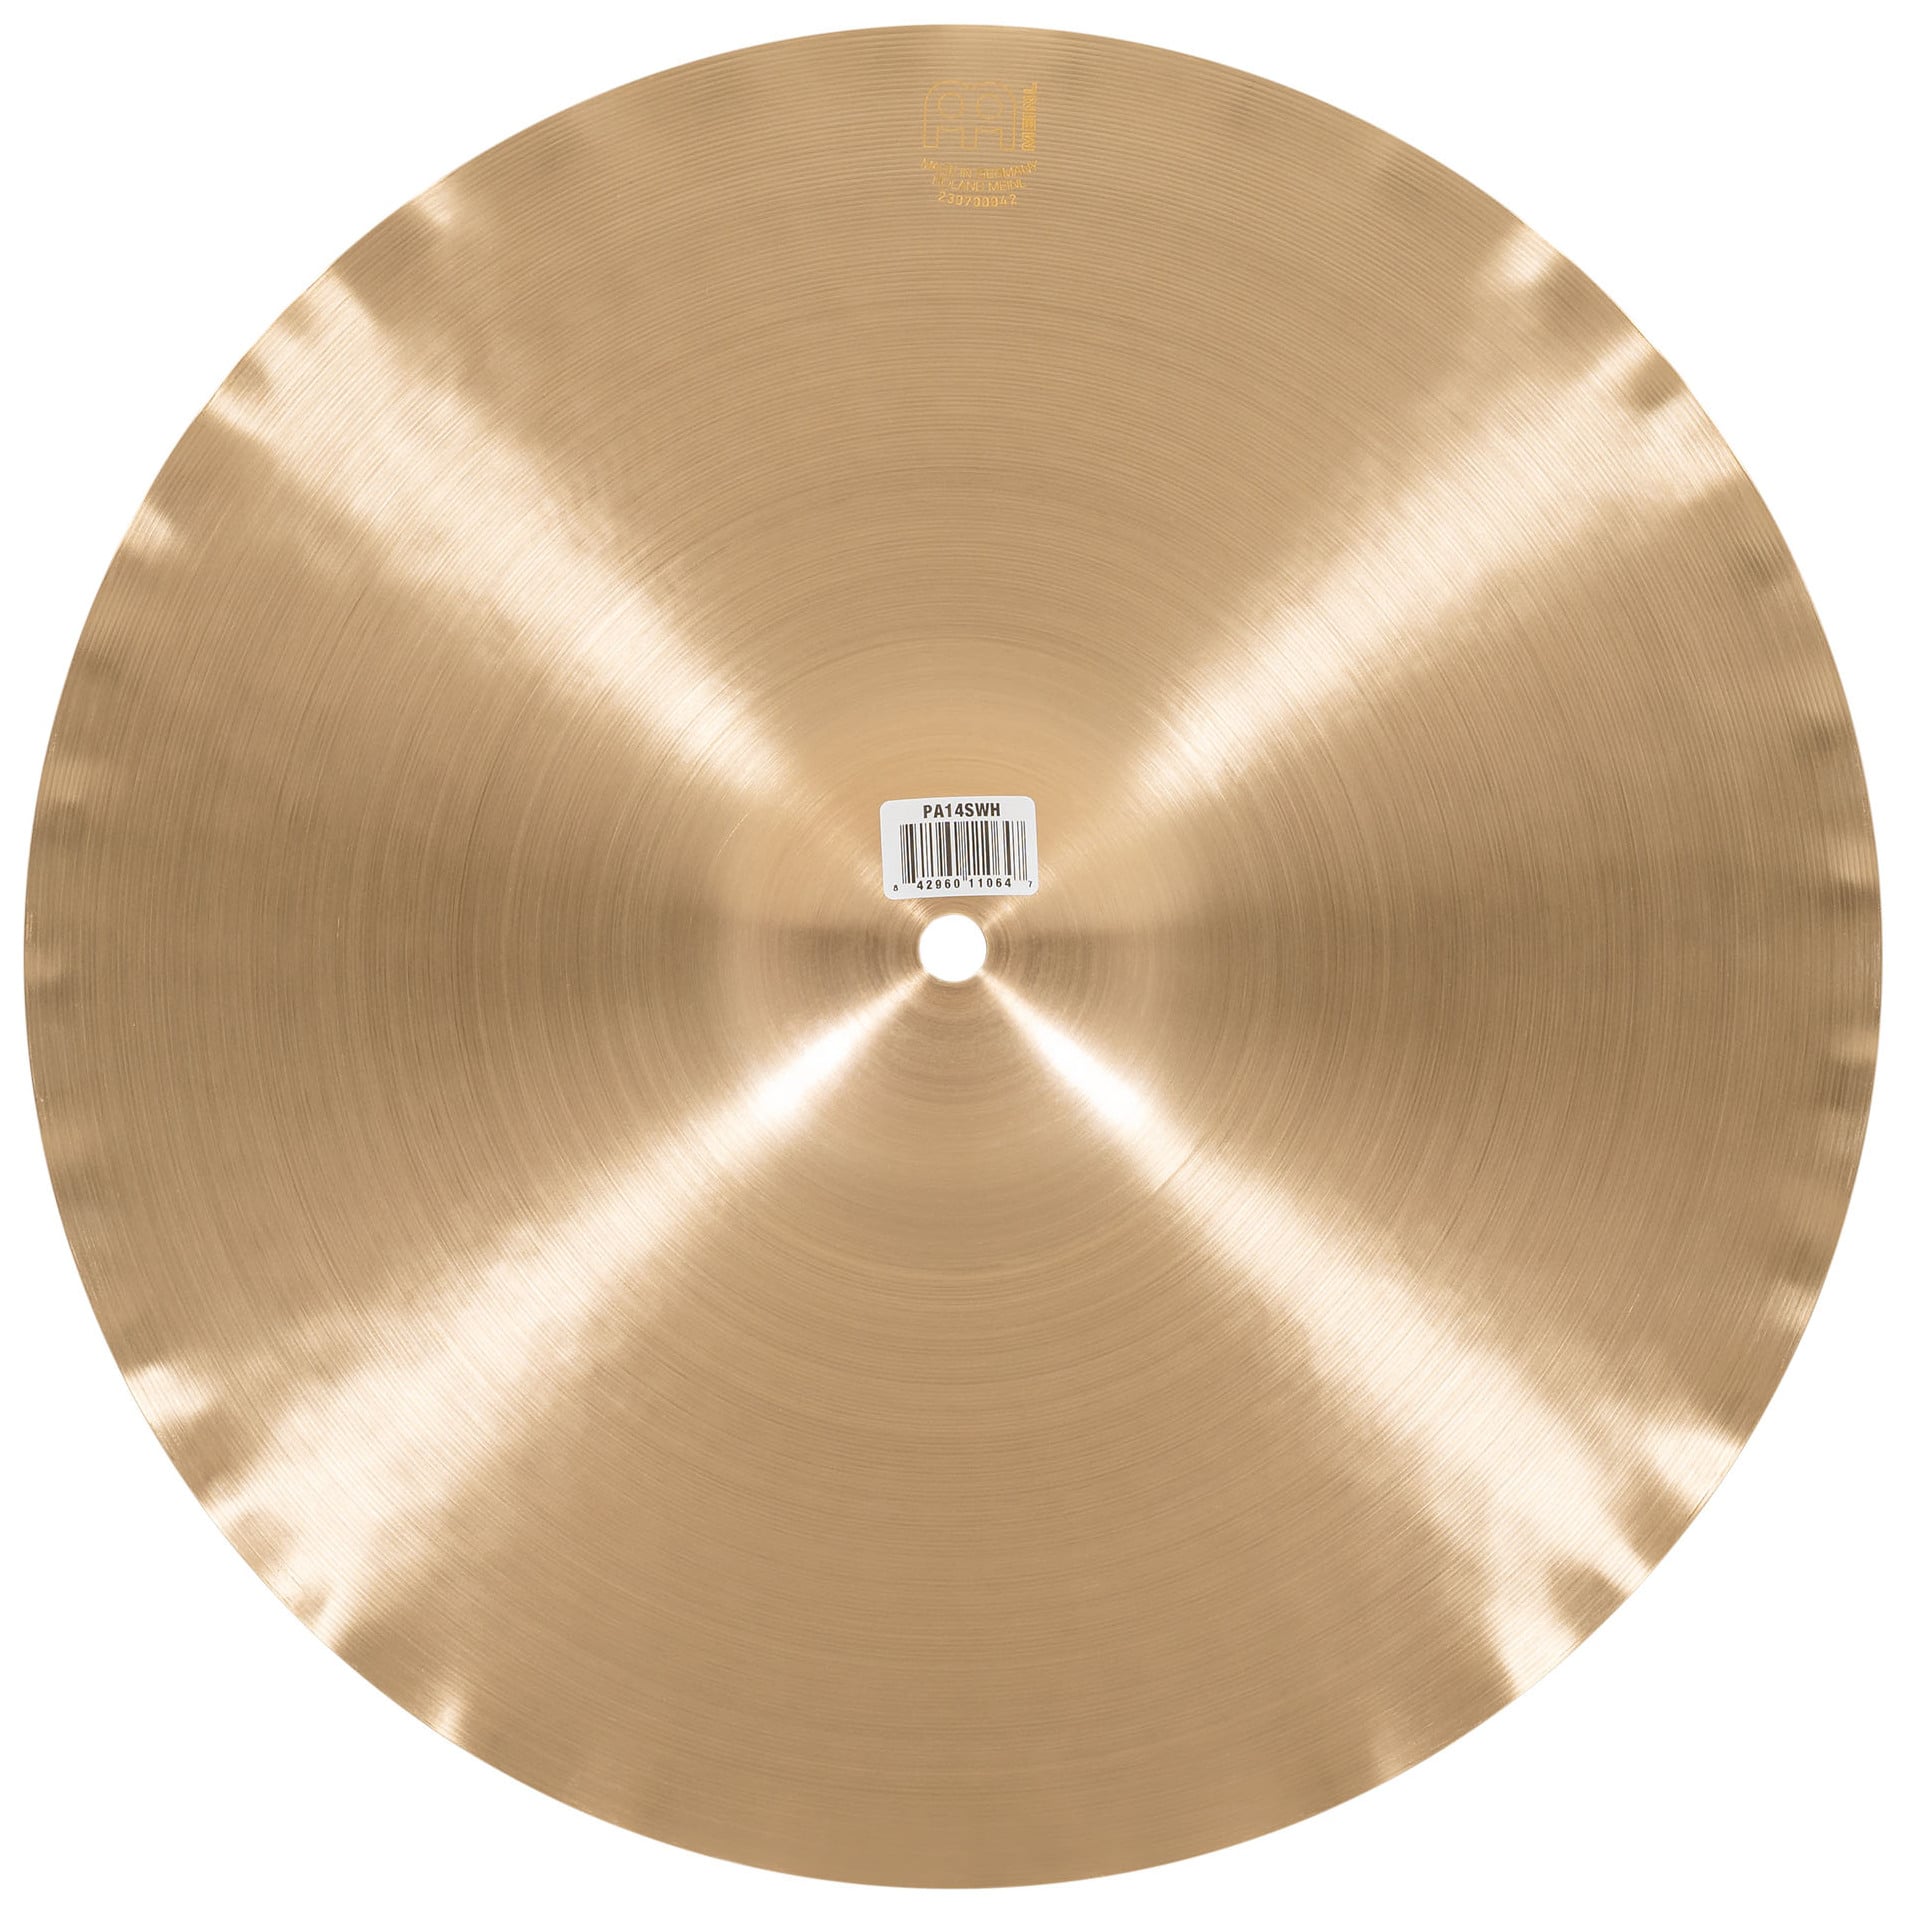 Meinl Cymbals PA14SWH - 14" Pure Alloy Soundwave Hihat 12